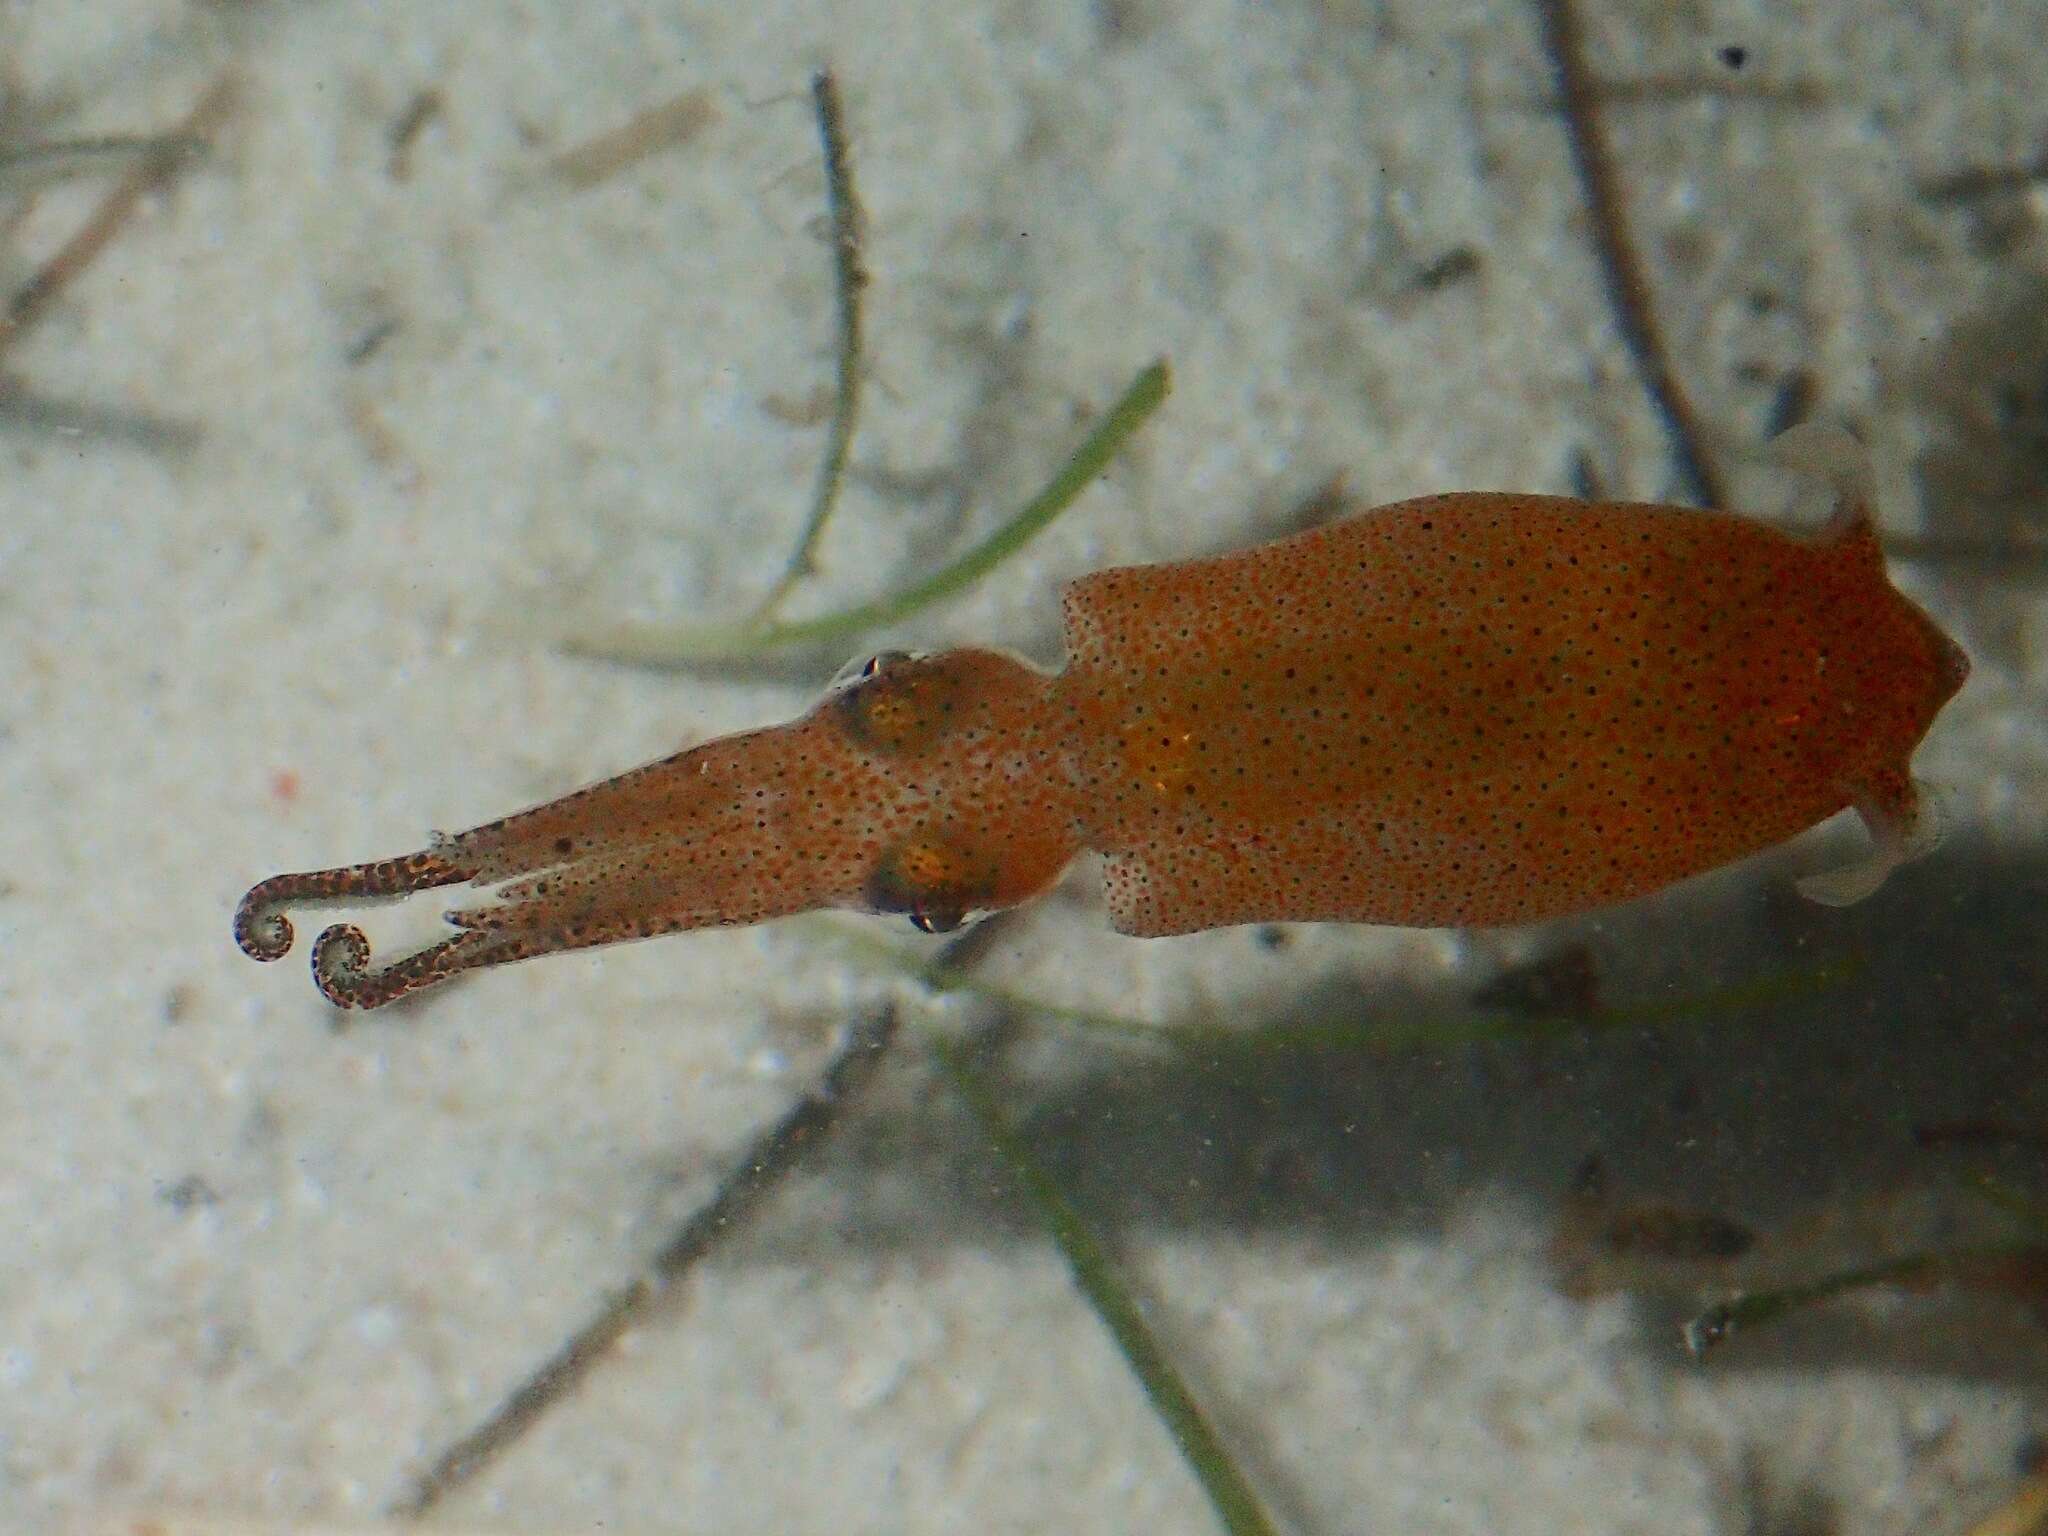 Image of Two-toned Pygmy Squid